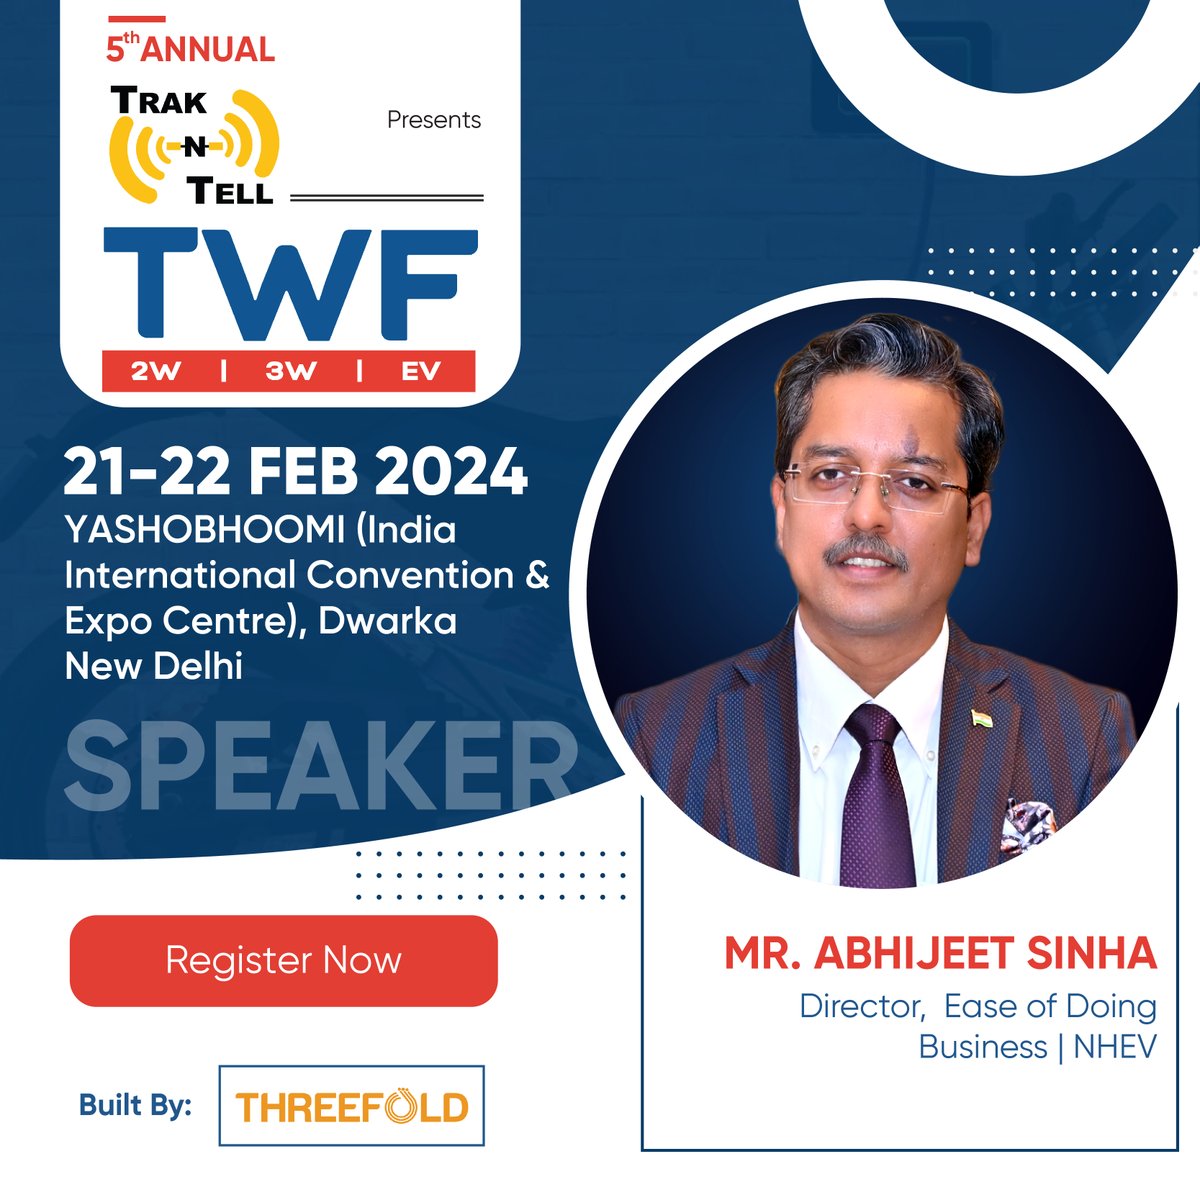 Exciting news! Mr. Abhijeet Sinha, Director, Ease of Doing Business, joins as a Speaker at 5th TWF on Feb 21-22, 2024, YASHOBHOOMI, New Delhi.
20% discount: bit.ly/46eqhju
Contact Raghav Shankar at +919599881027 or raghav@threefold.in for details. 
#TWF2024 #EVForum #ev